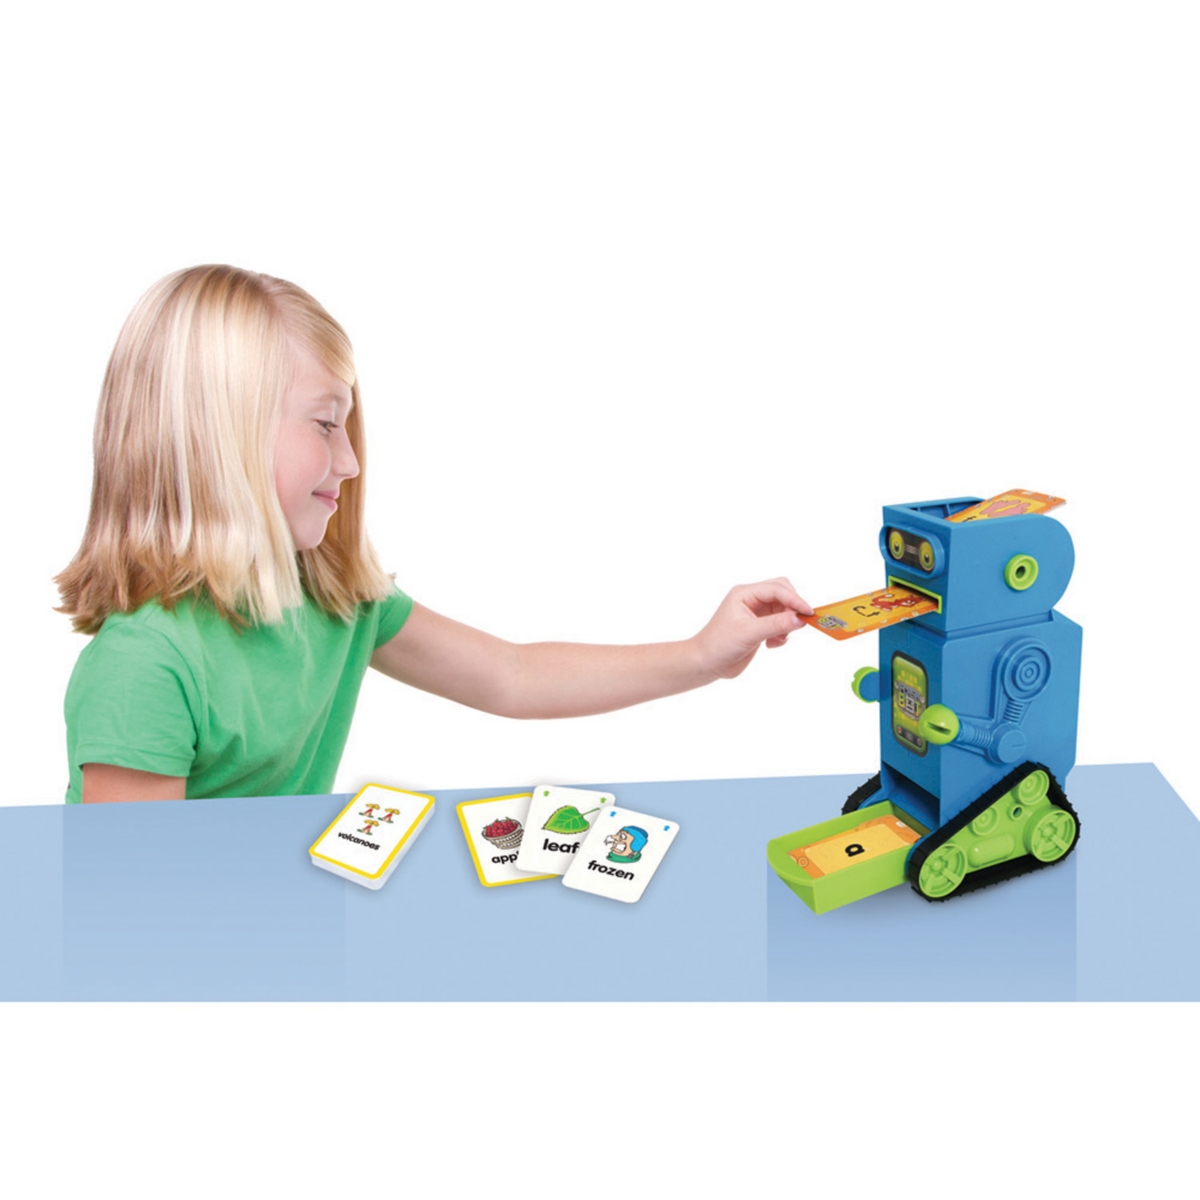 Junior Learning Kids' Flashbot Flash Card Robot Includes 20 Demonstration Flash Cards In Multi